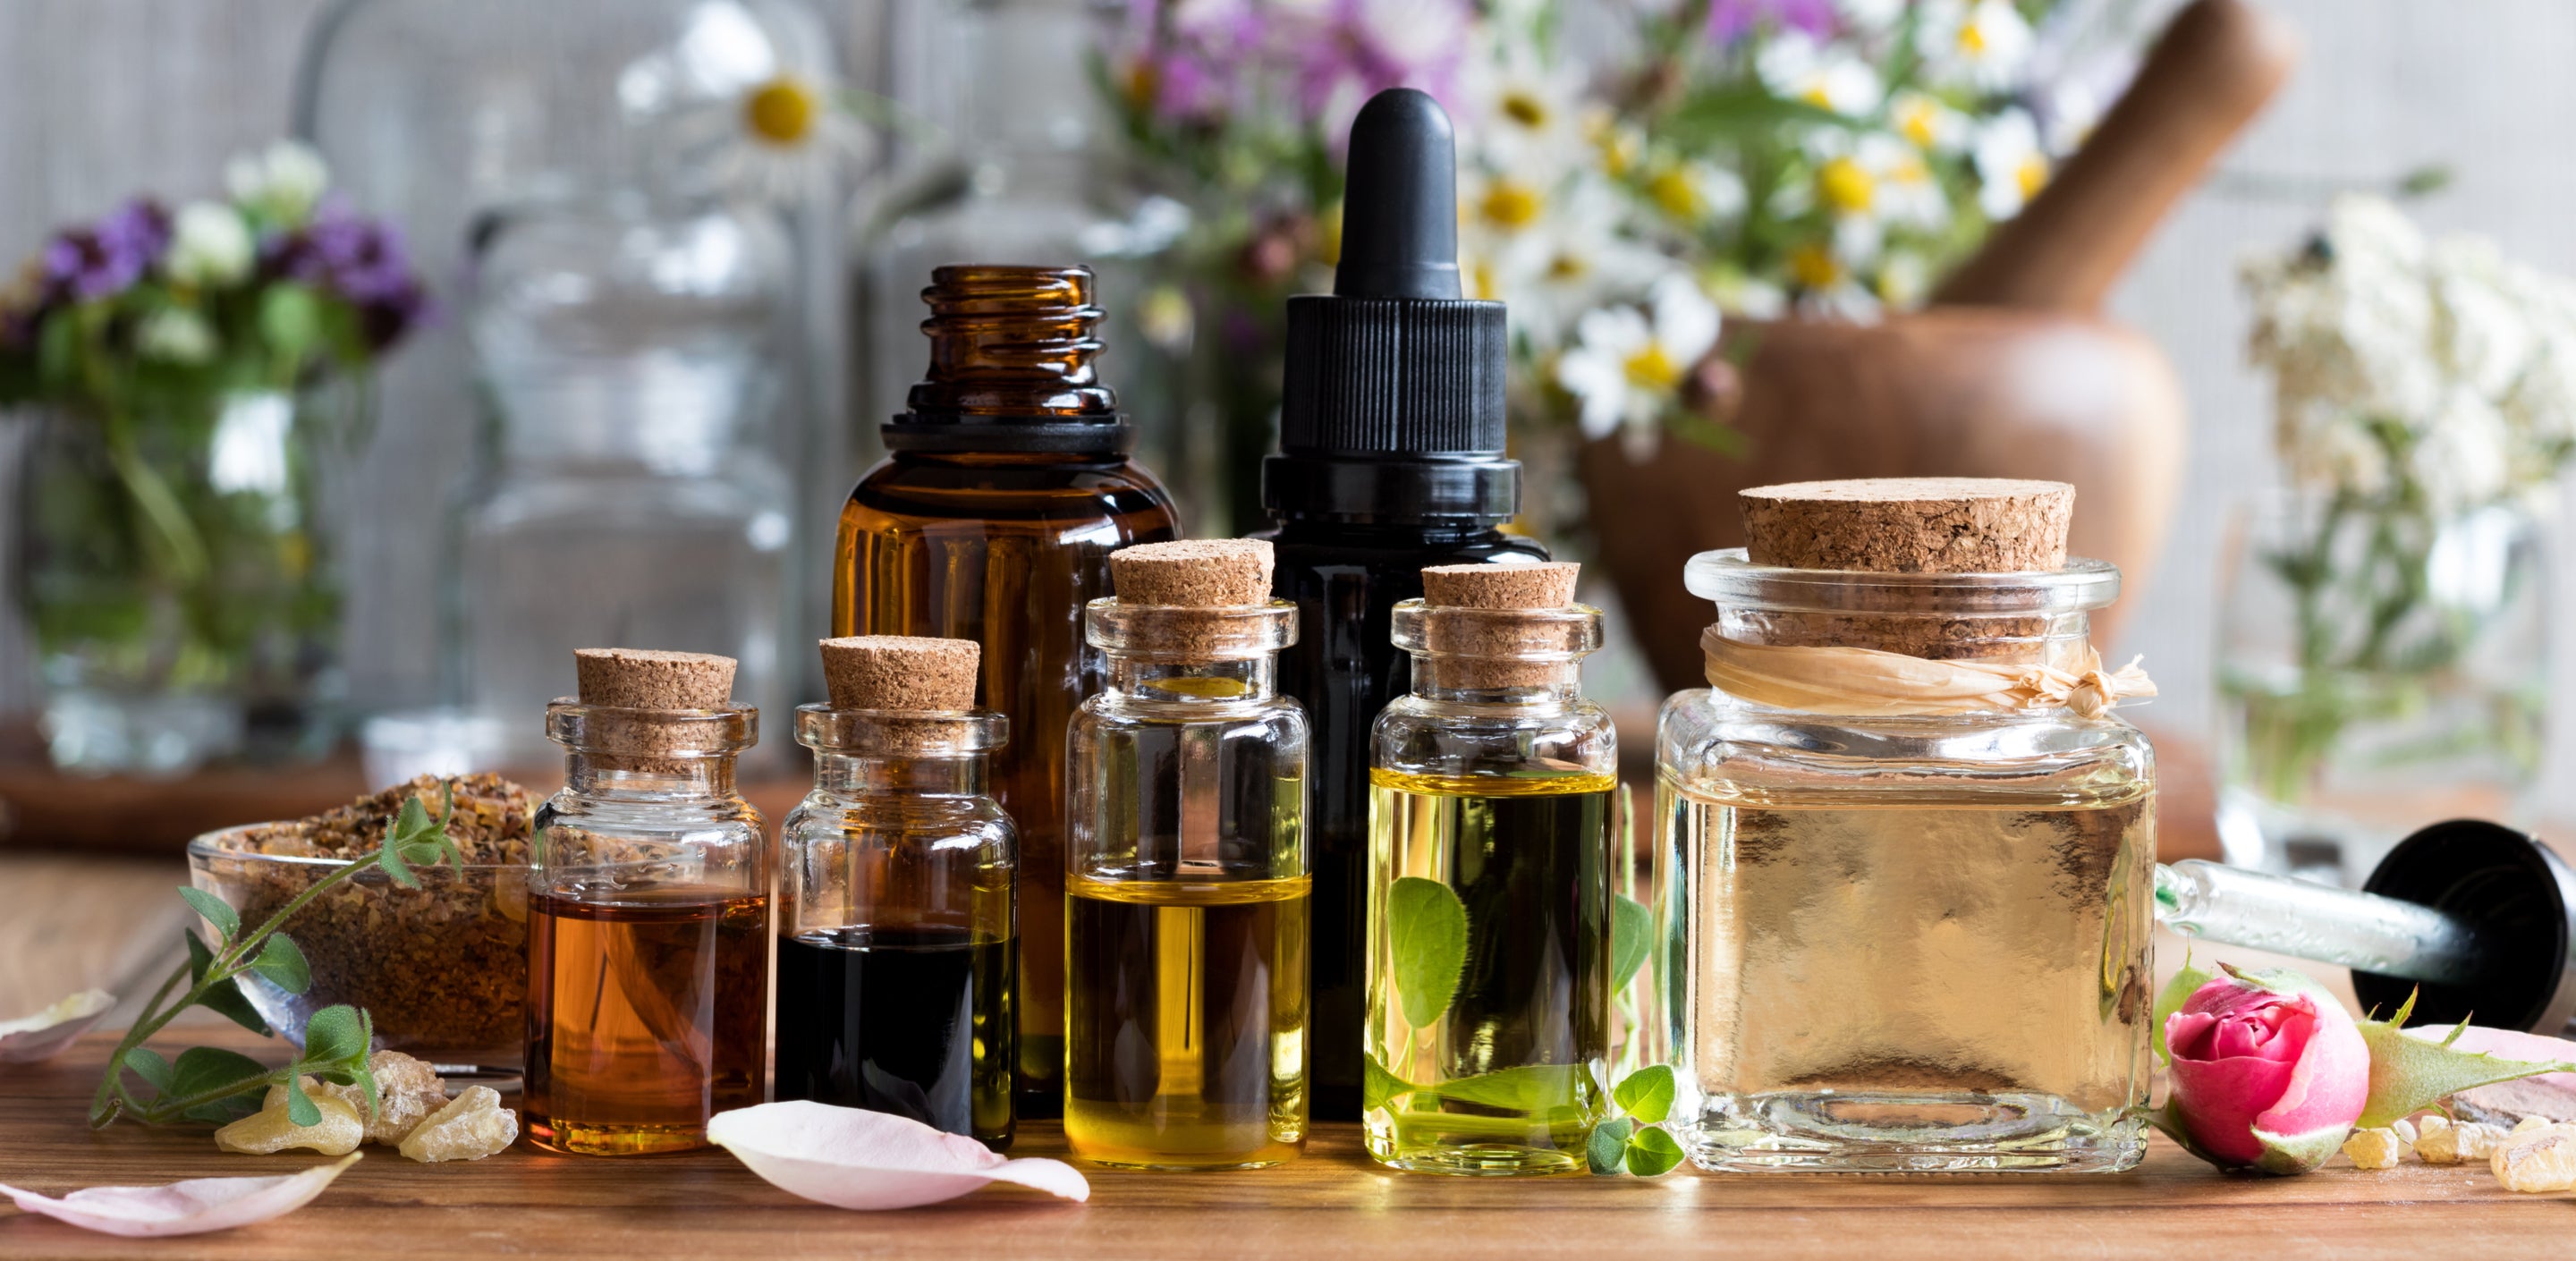 Using Oils In Your Skincare Routine